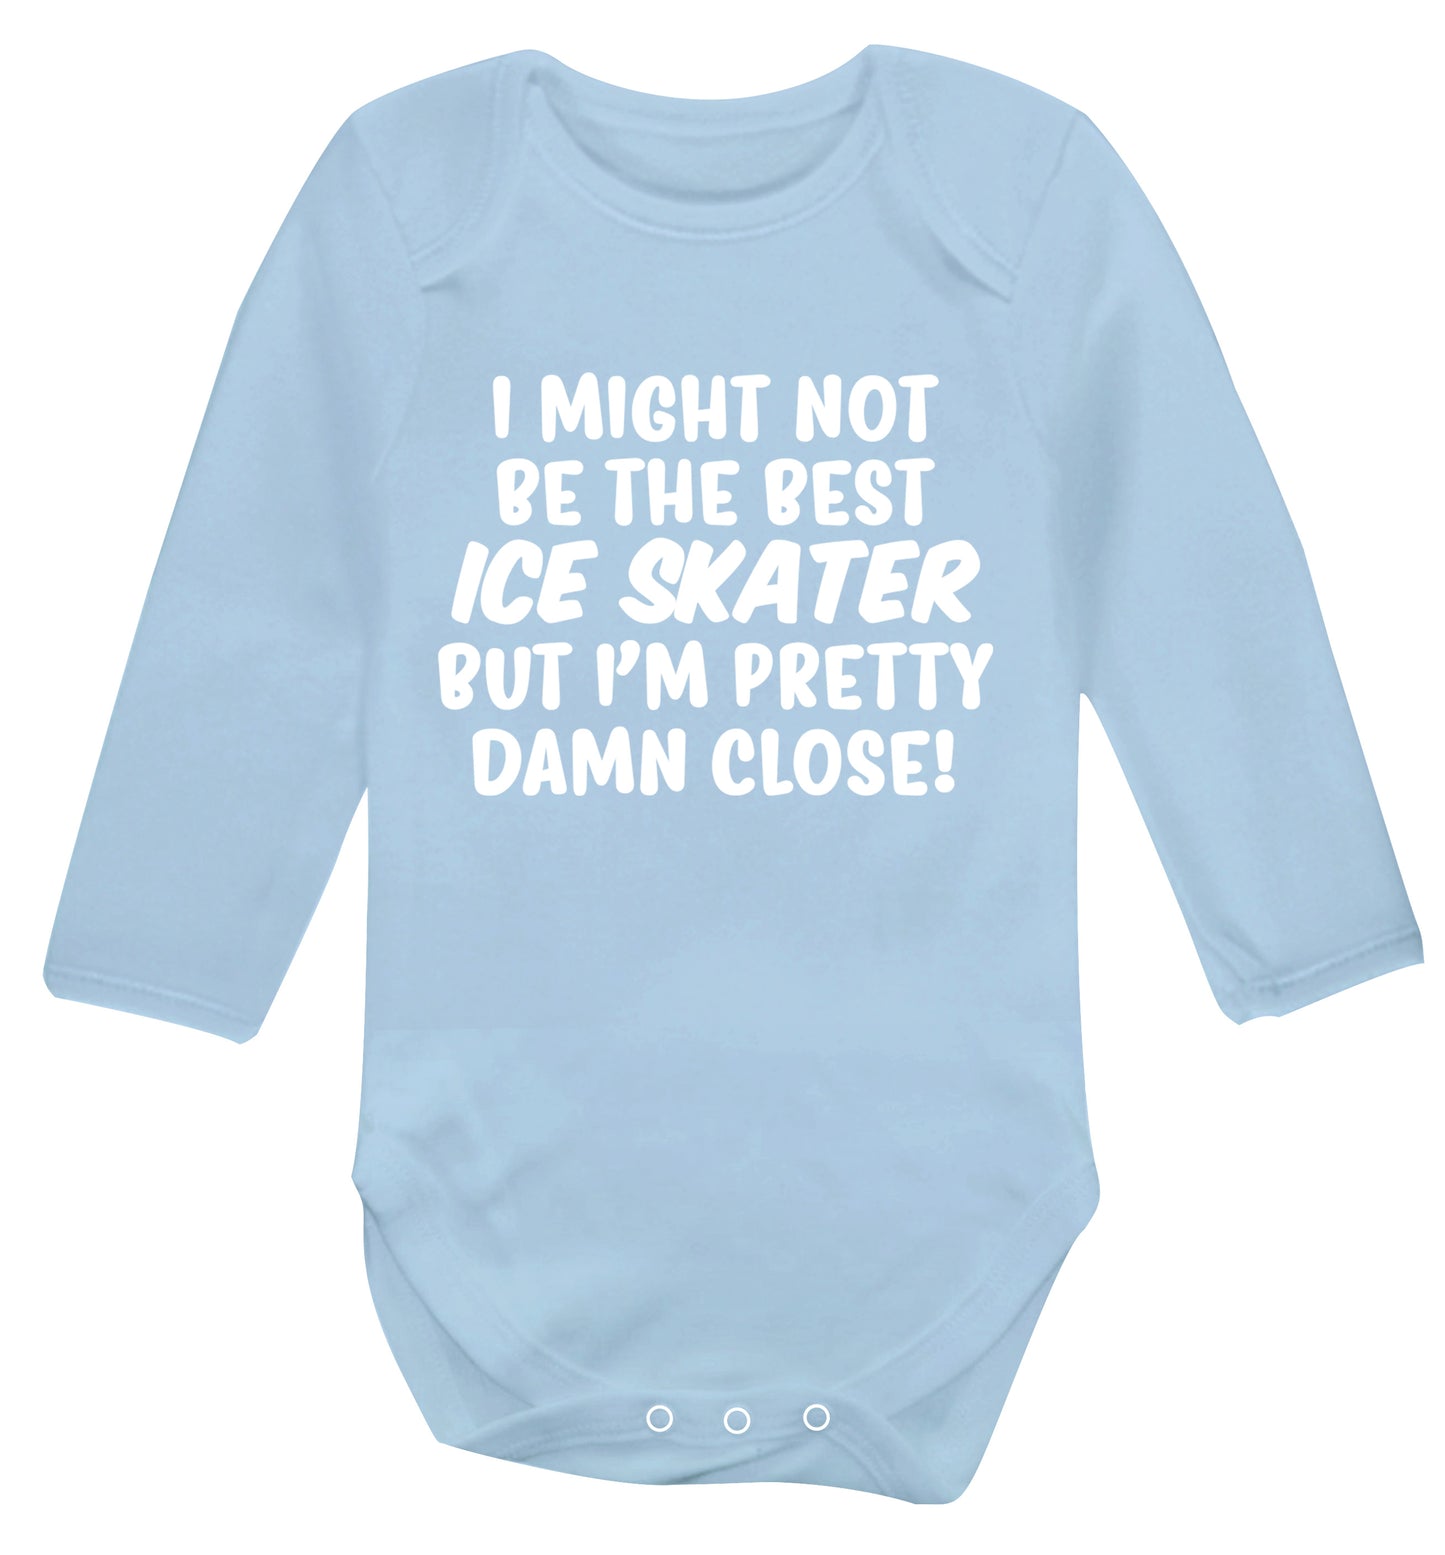 I might not be the best ice skater but I'm pretty damn close! Baby Vest long sleeved pale blue 6-12 months